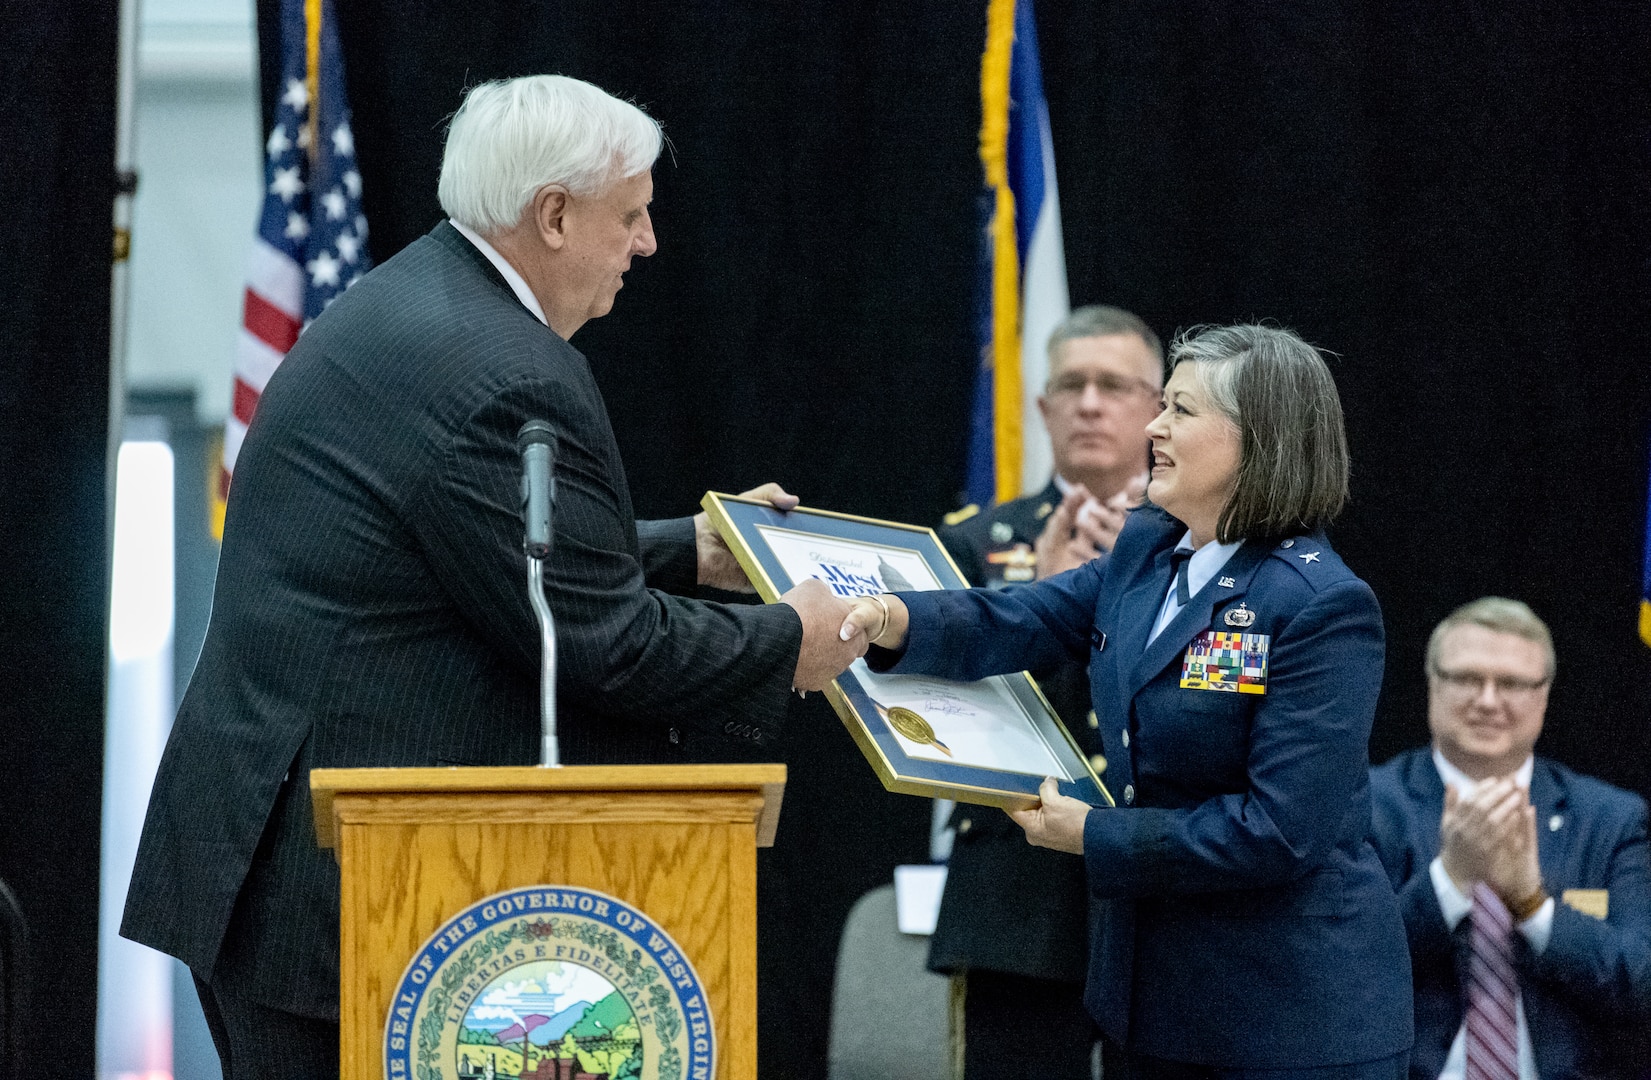 Brig. Gen. Christopher “Mookie” Walker assumed command of the West Virginia Air National Guard from Brig. Gen. Paige P. Hunter during a formal change of command ceremony held Feb. 2, 2019, at the 130th Airlift Wing, McLaughlin Air National Guard Base in Charleston.